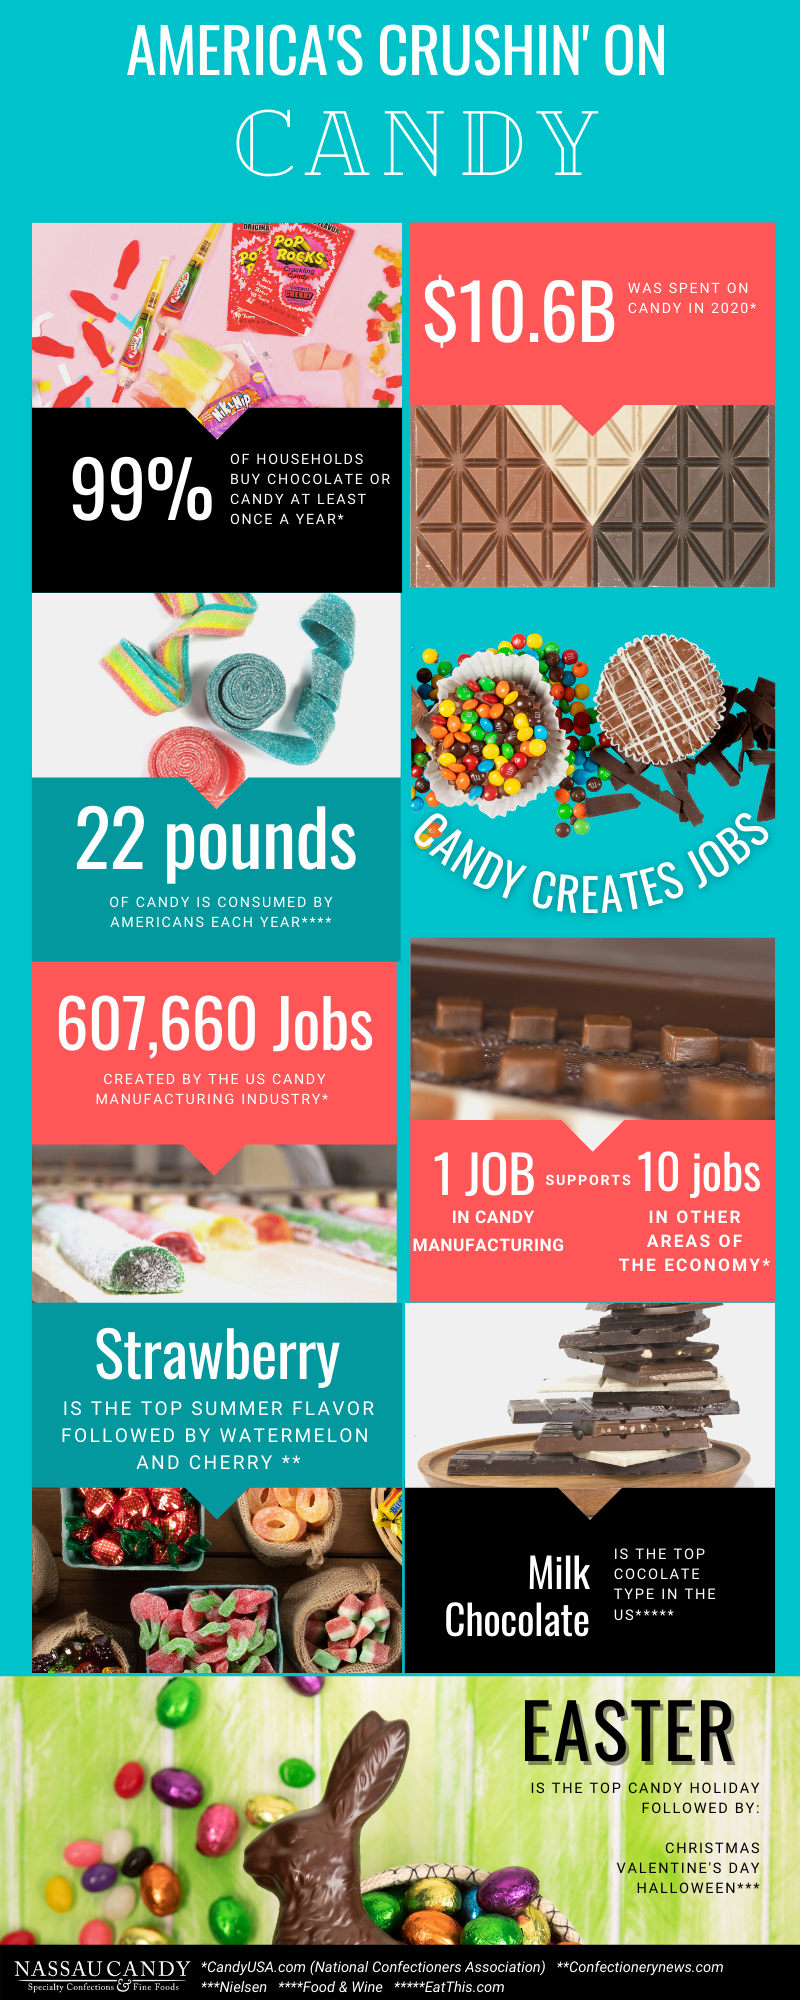 National candy month infographic, candy facts, candy manufacturing, America's favorite candy flavor, candy manufacturing jobs, fun facts, Candy holidays